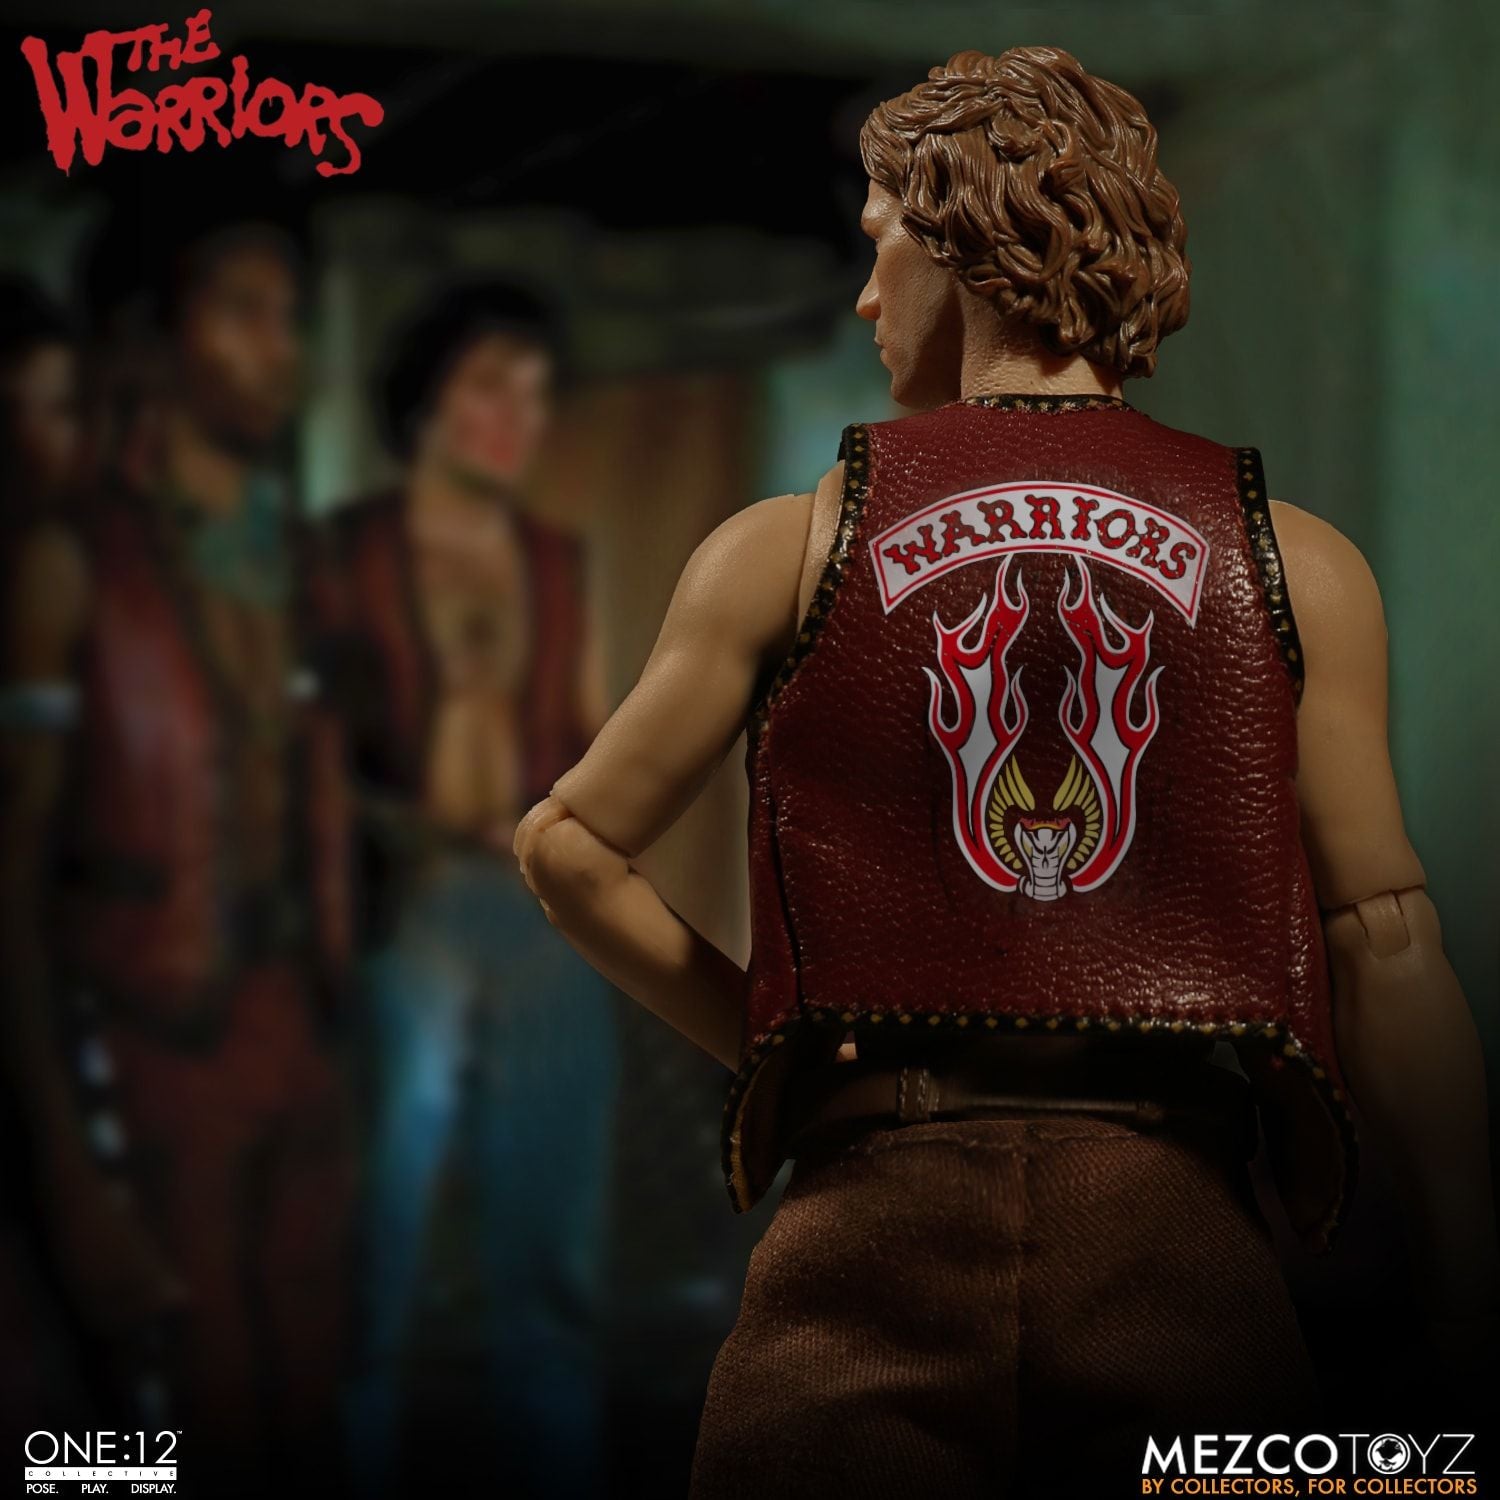 Mezco Warriors One:12 Collective Action Figure Set wit Collectible Tin Case - Collectors Row Inc.